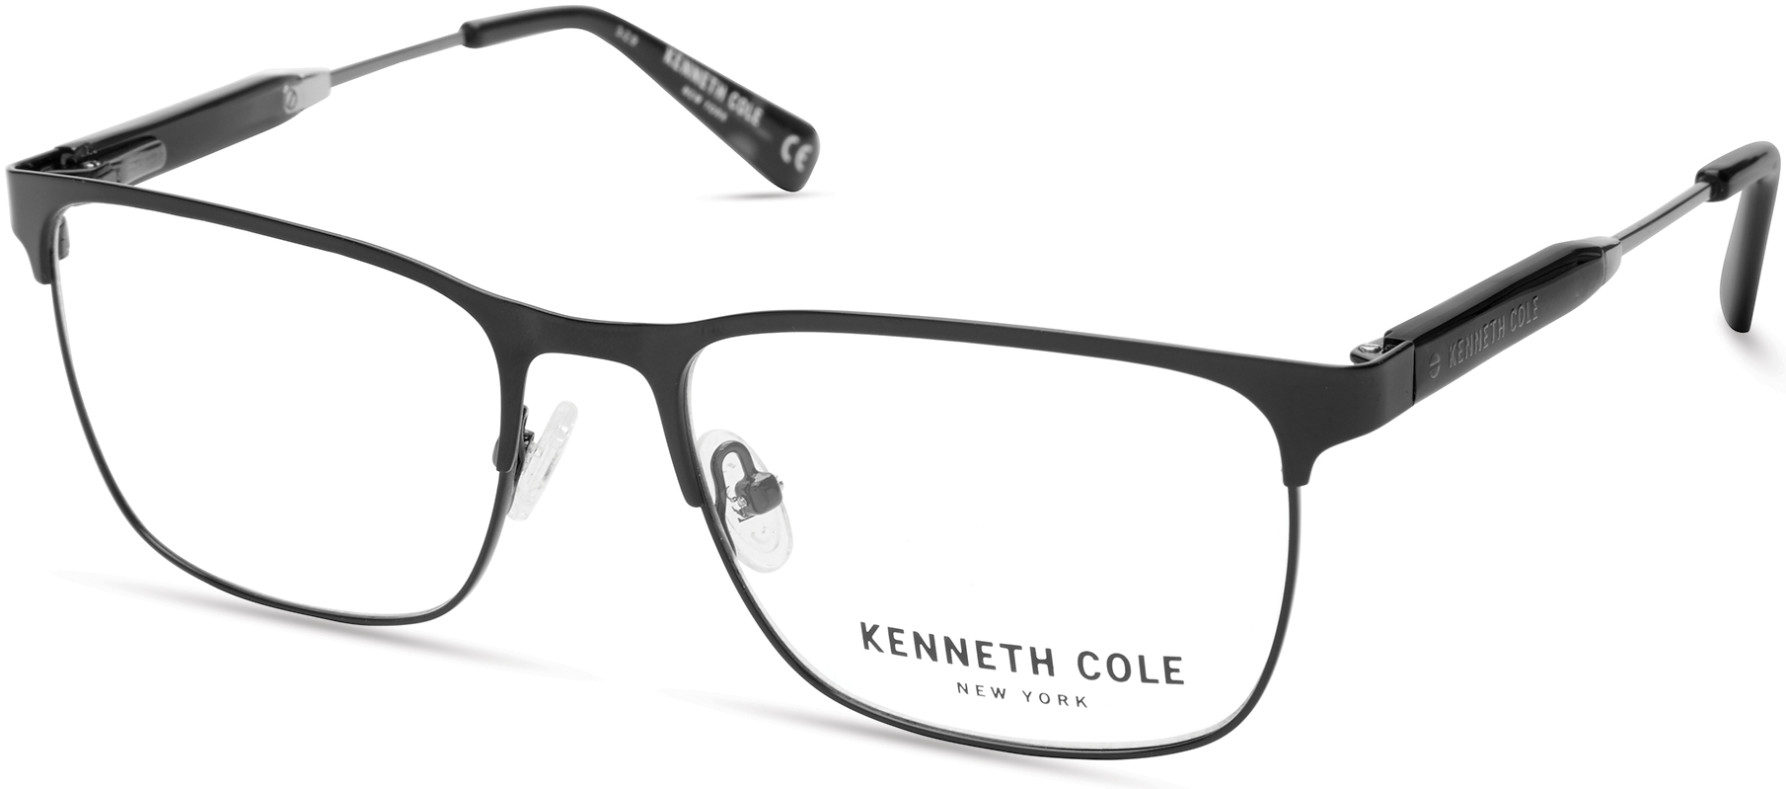 KENNETH COLE NY 0312 002